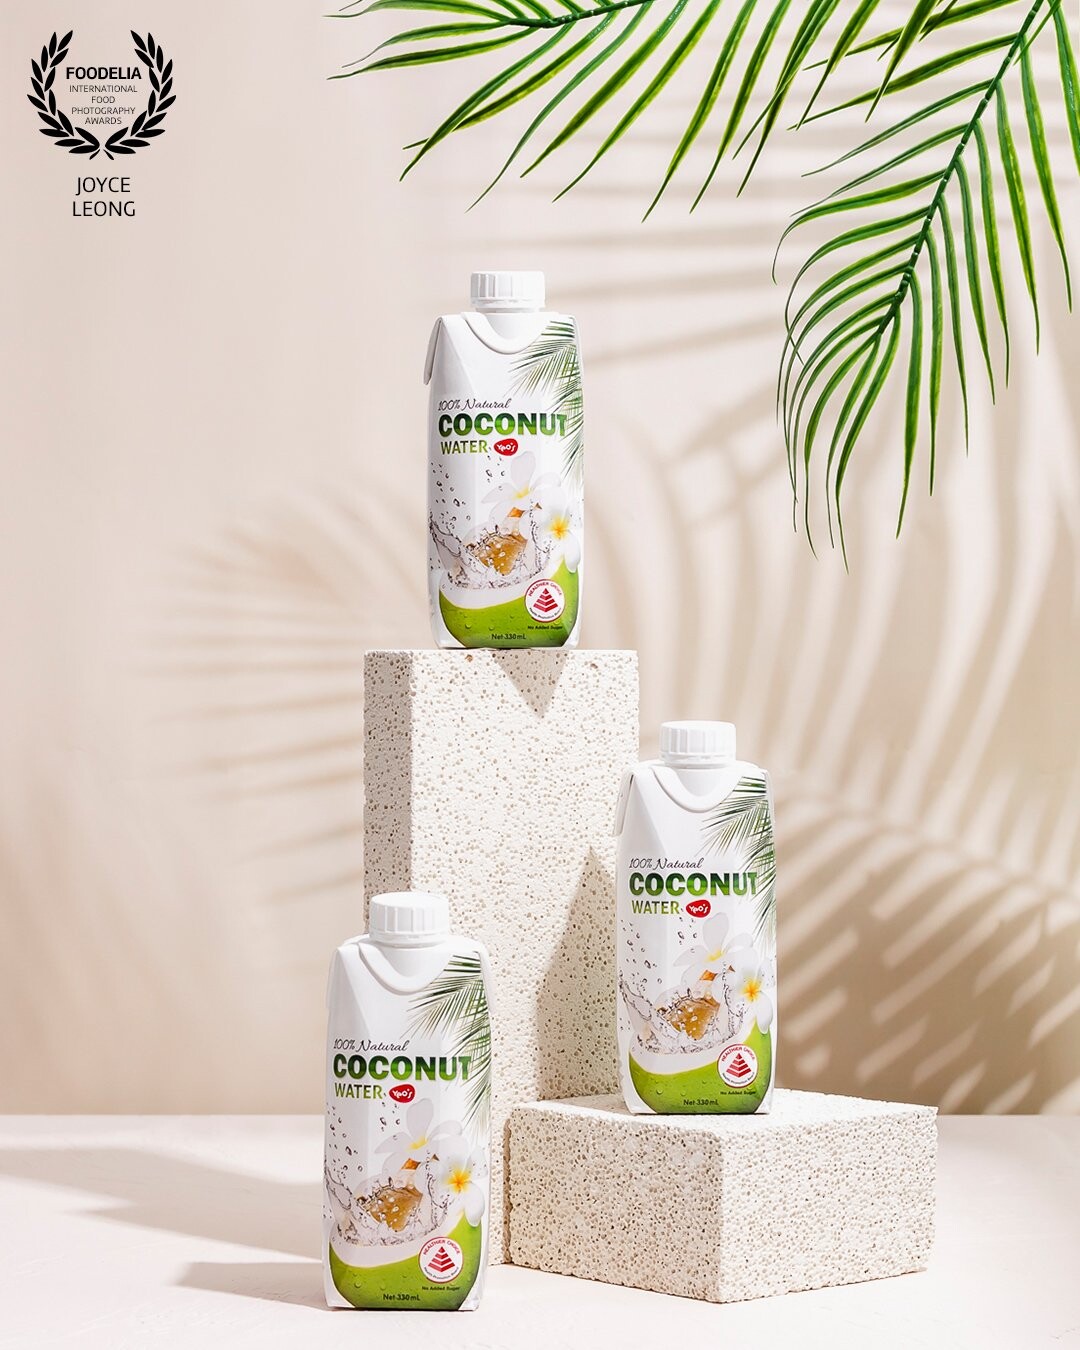 I wanted to create a beach theme around coconut drinks thus the choice of hard light and shadow of the palm leaves. The colours were kept neutral so that the branding of the drinks would pop.